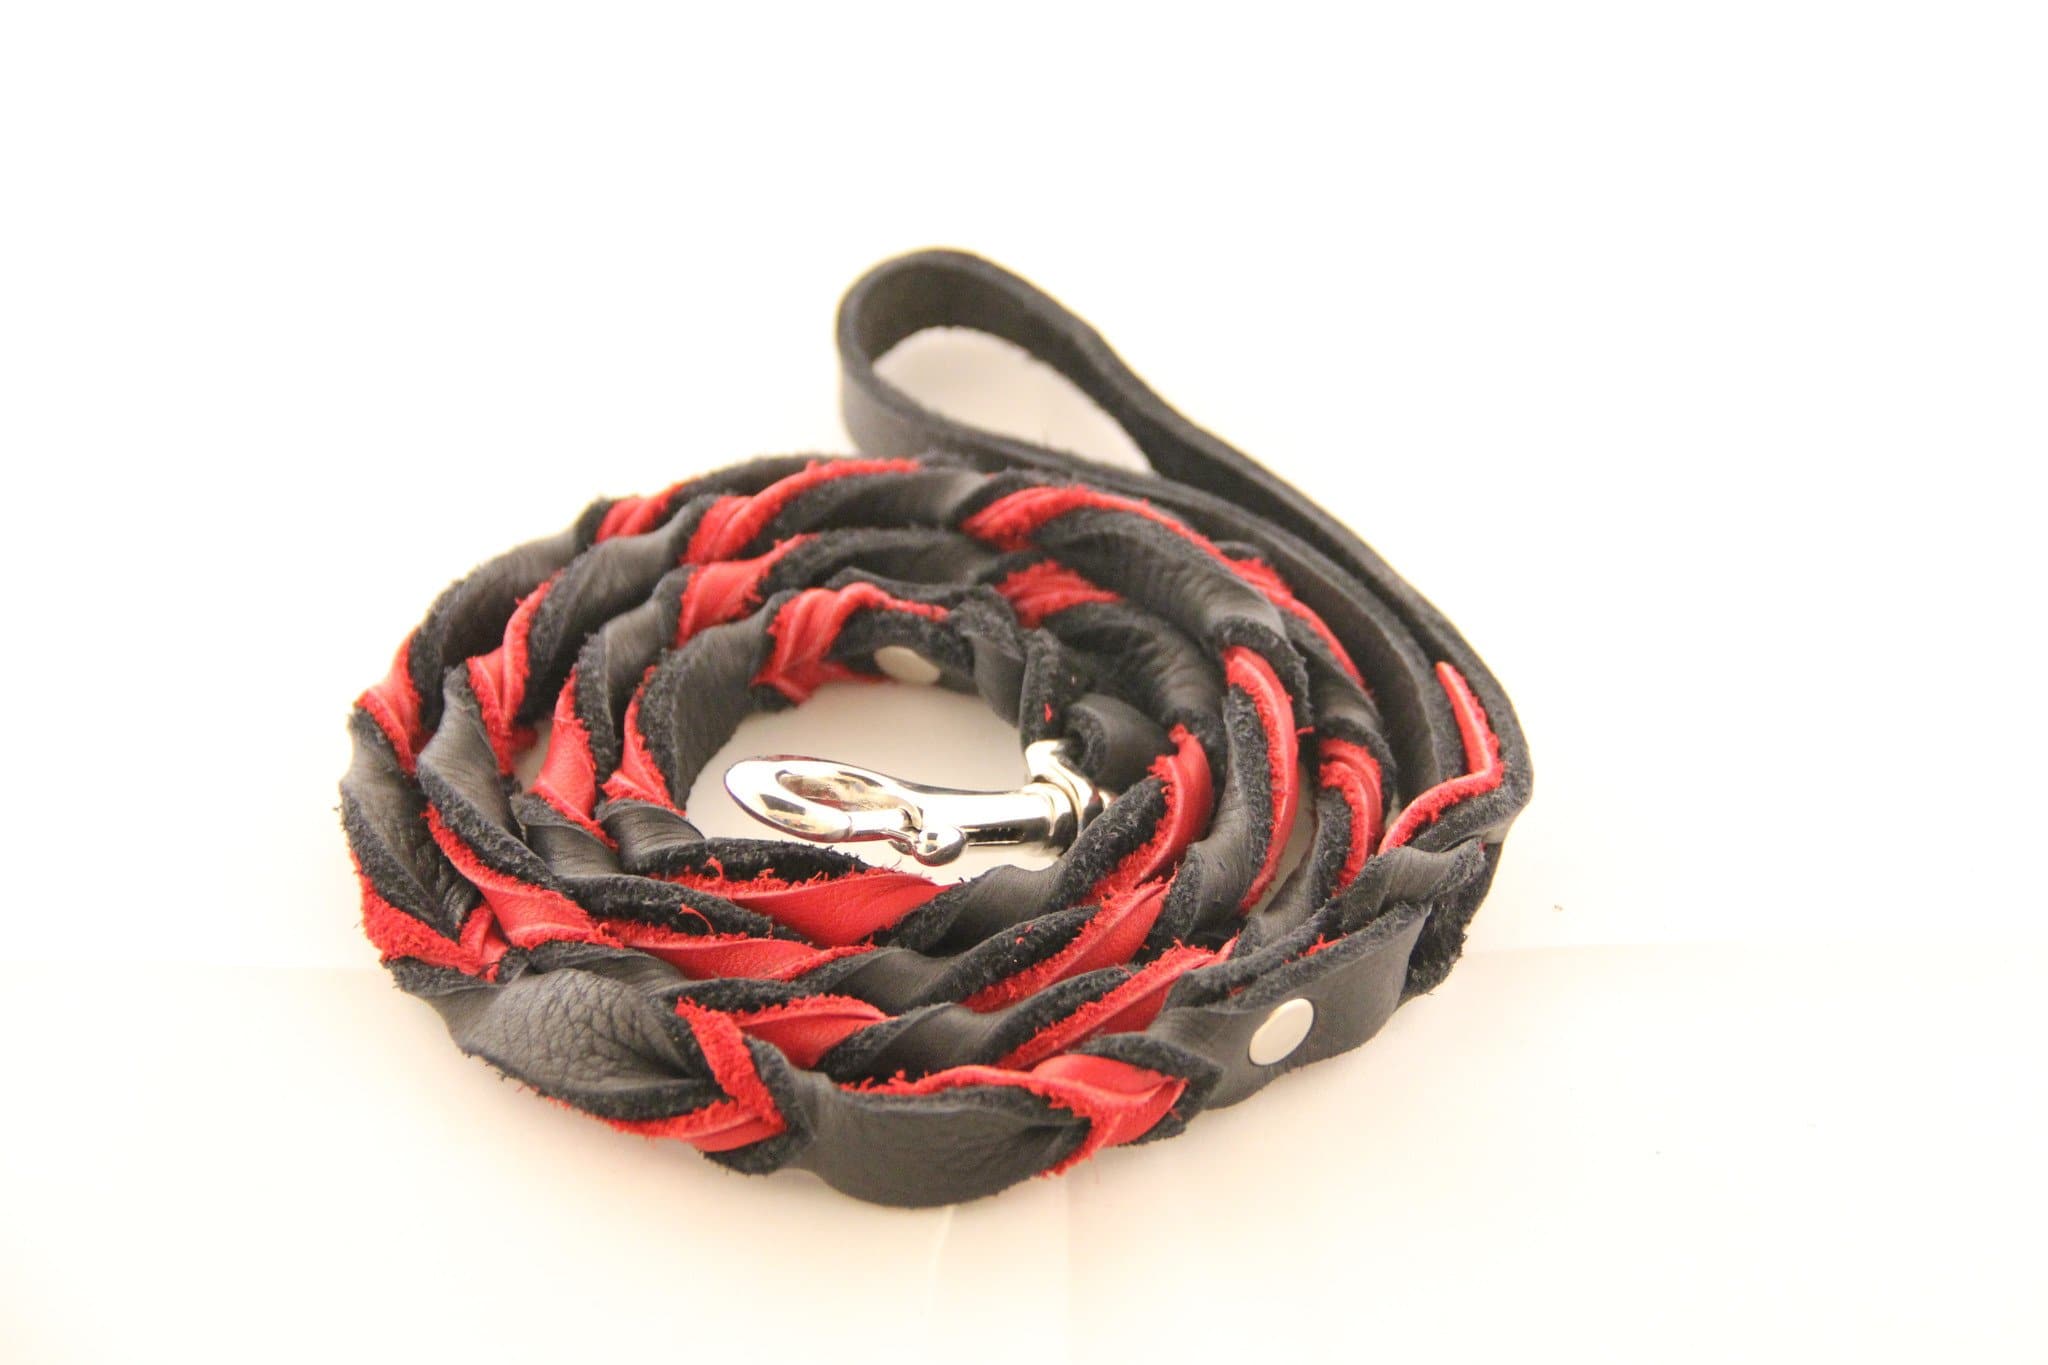 Wright Durable Braided red and black Leather Dog Leash 